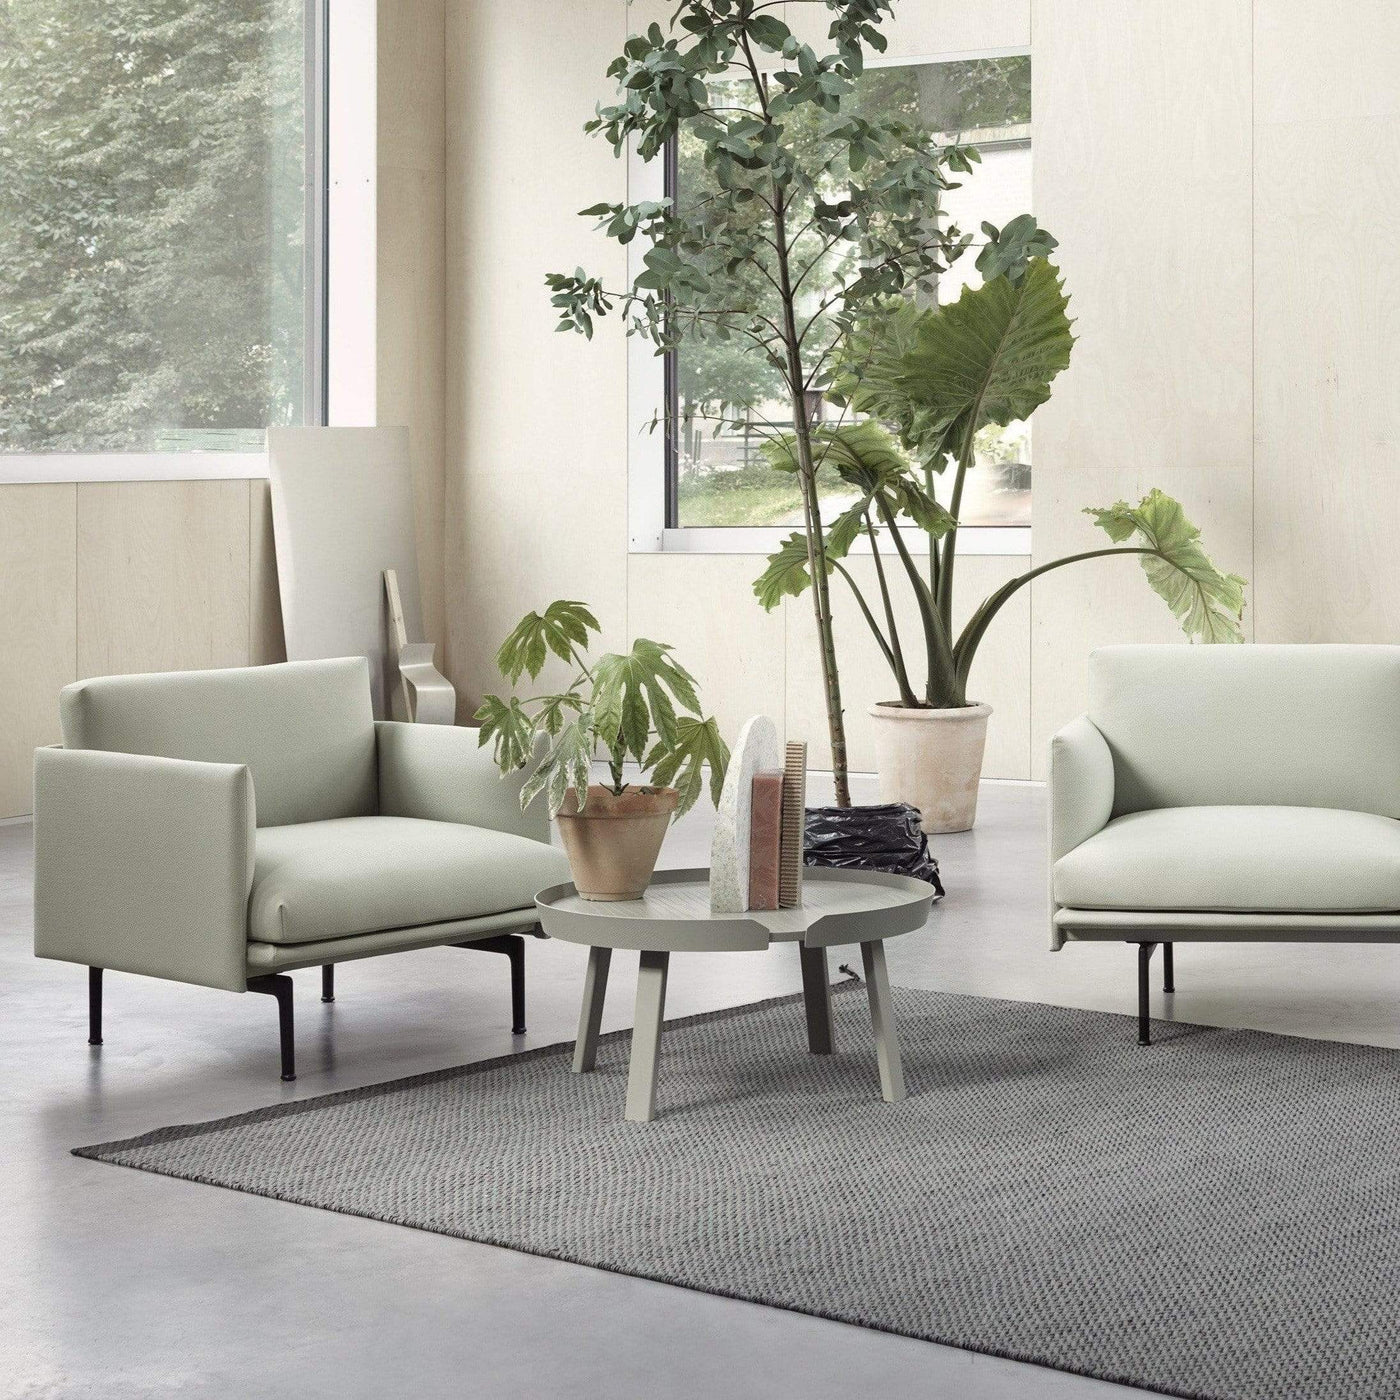 muuto outline studio chair & sofa available at someday designs